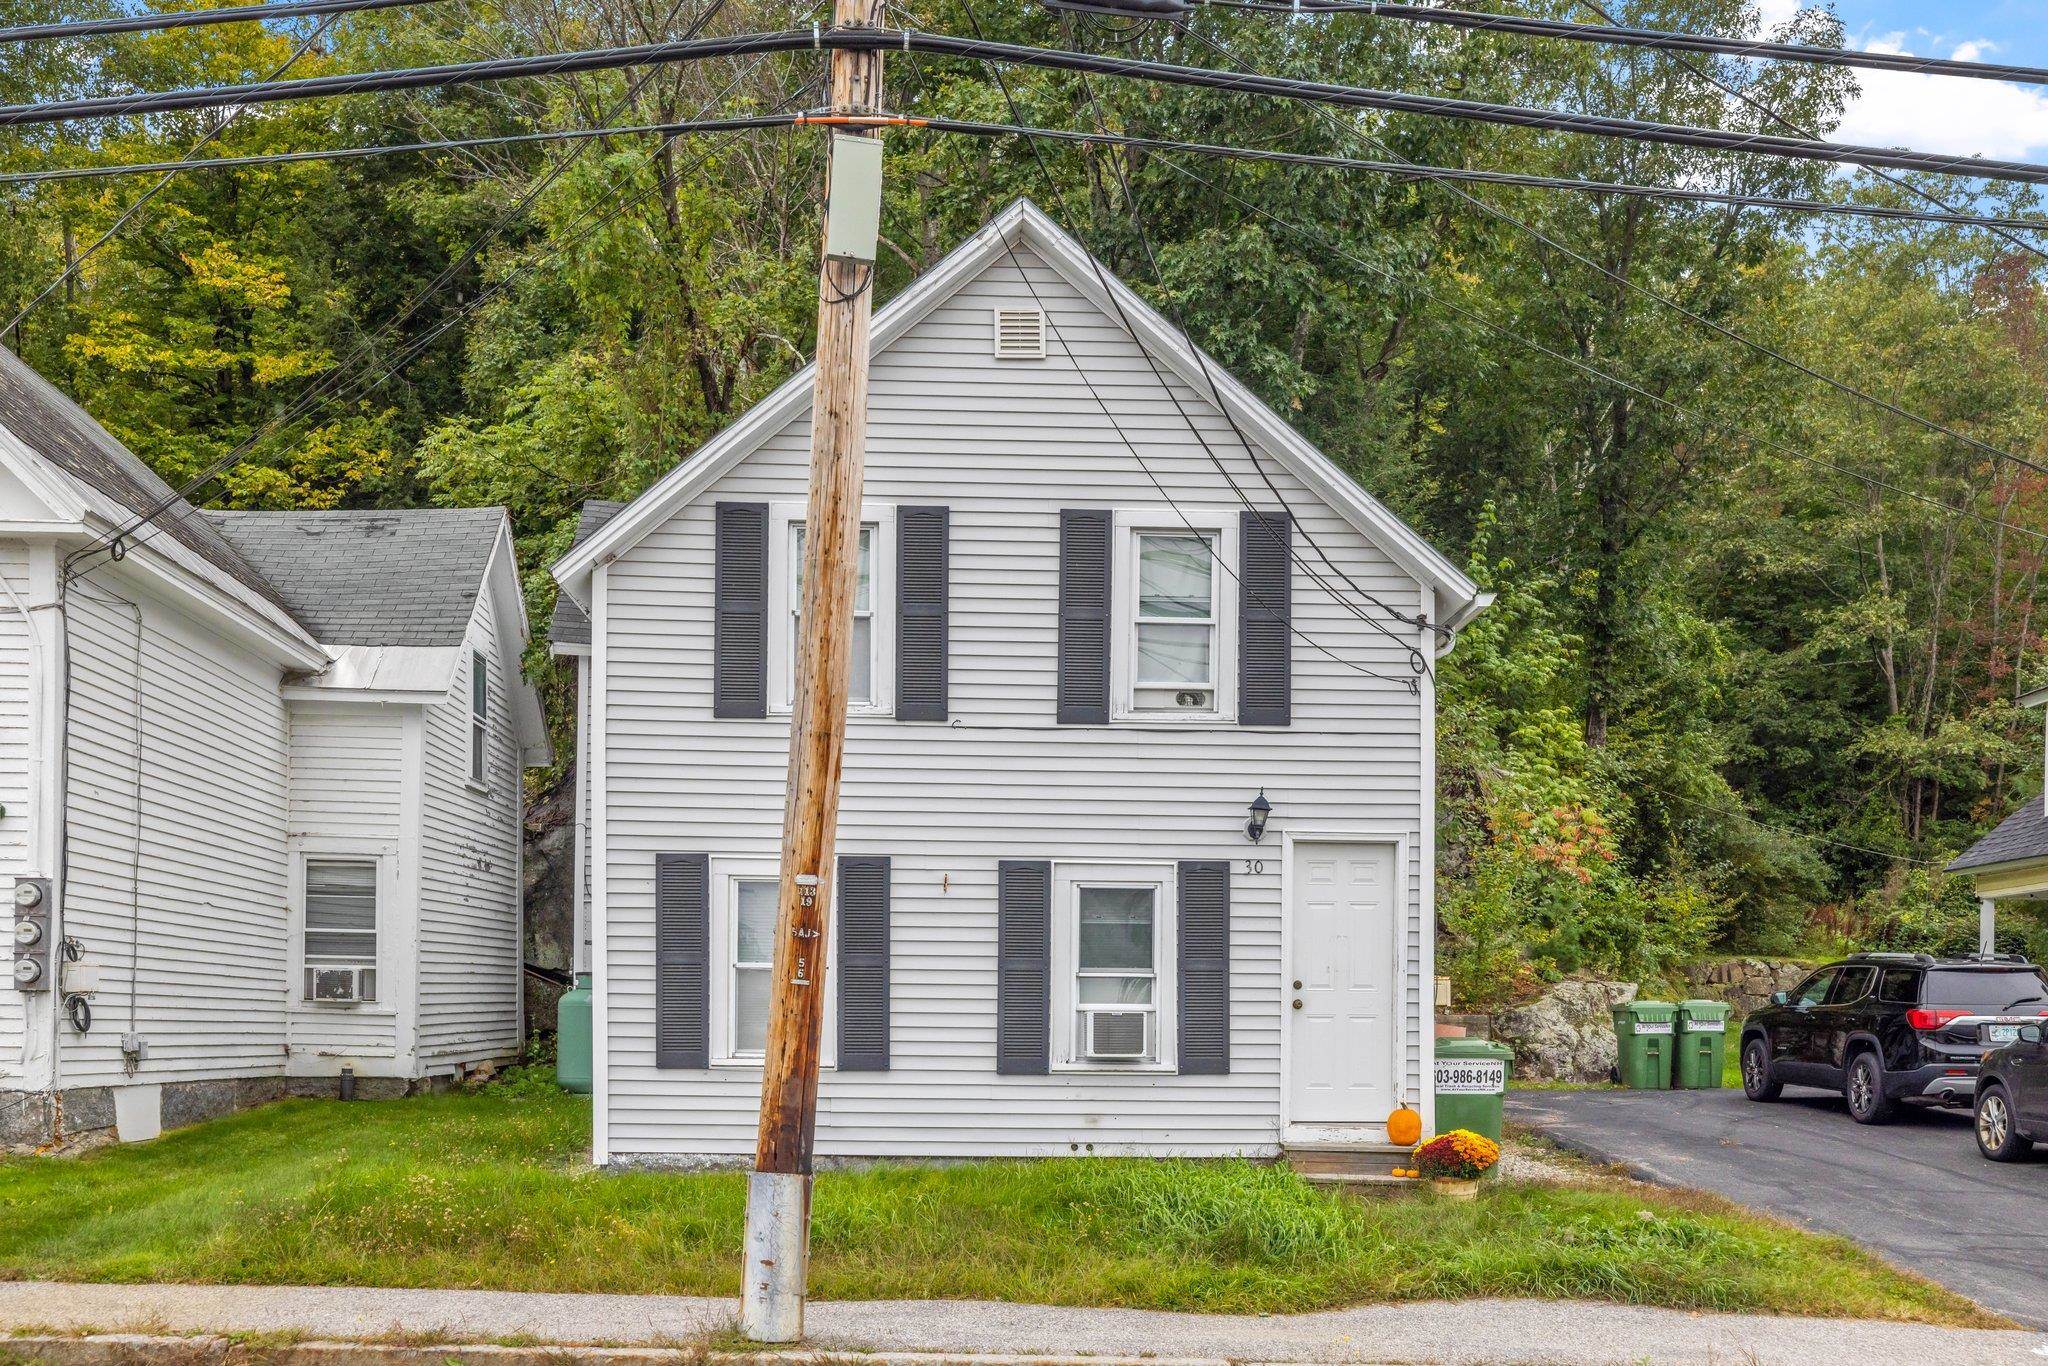 30 Plymouth Street, Meredith, NH 03253